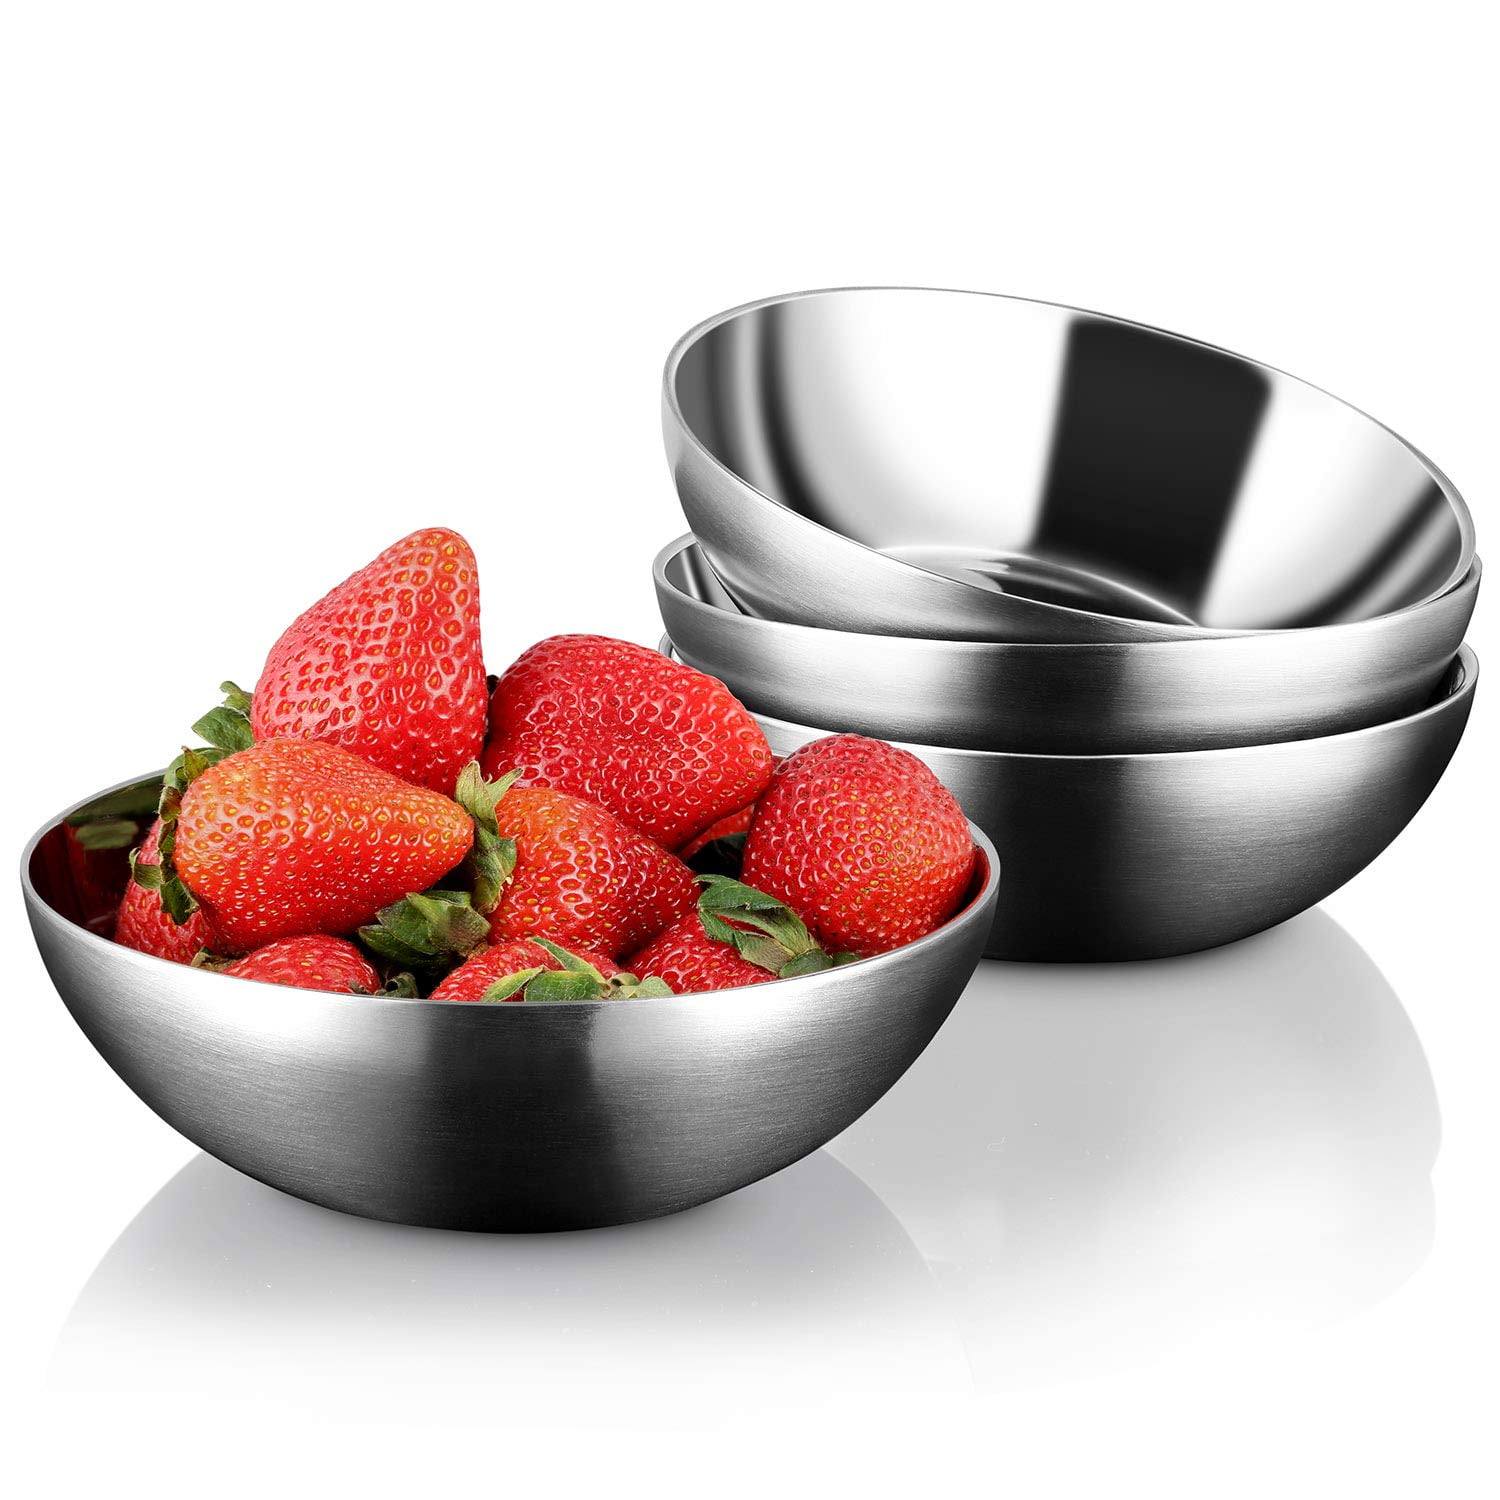 Unbreakable and Dishwasher Safe 4 Pack BPA-Free Heavy 18/8 Stainless Steel Toddlers Bowls HaWare 12 oz Feeding|Soup|Snacks Double Walled Bowls for Babies Kids